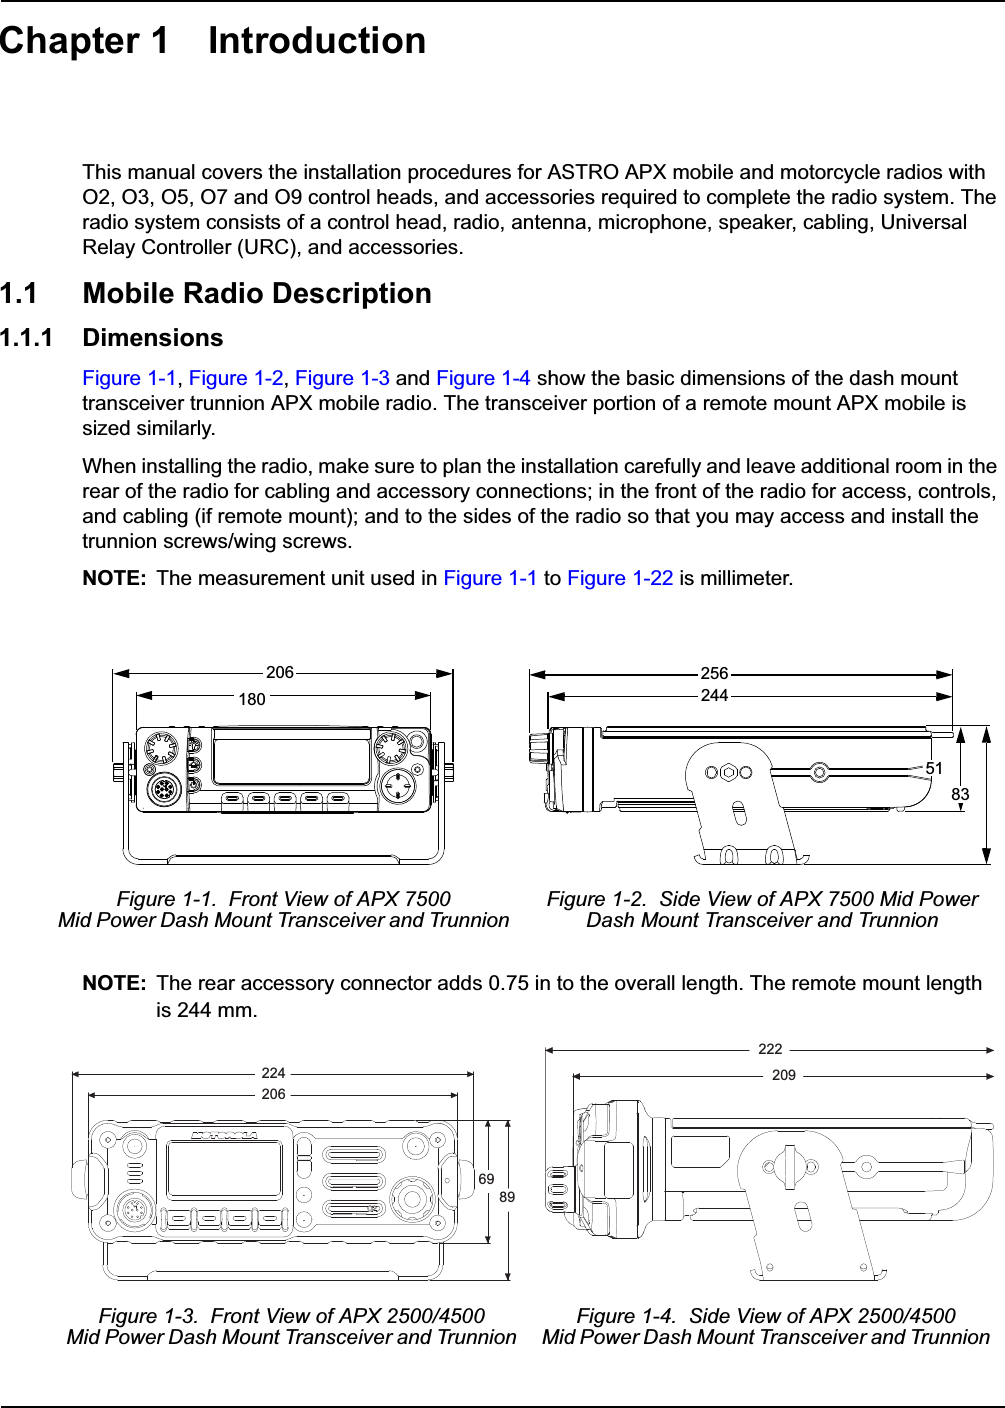 Chapter 1 IntroductionThis manual covers the installation procedures for ASTRO APX mobile and motorcycle radios with O2, O3, O5, O7 and O9 control heads, and accessories required to complete the radio system. The radio system consists of a control head, radio, antenna, microphone, speaker, cabling, Universal Relay Controller (URC), and accessories.1.1 Mobile Radio Description1.1.1 DimensionsFigure 1-1, Figure 1-2, Figure 1-3 and Figure 1-4 show the basic dimensions of the dash mount transceiver trunnion APX mobile radio. The transceiver portion of a remote mount APX mobile is sized similarly. When installing the radio, make sure to plan the installation carefully and leave additional room in the rear of the radio for cabling and accessory connections; in the front of the radio for access, controls, and cabling (if remote mount); and to the sides of the radio so that you may access and install the trunnion screws/wing screws.NOTE: The measurement unit used in Figure 1-1 to Figure 1-22 is millimeter.NOTE: The rear accessory connector adds 0.75 in to the overall length. The remote mount lengthis 244 mm.Figure 1-1.  Front View of APX 7500 Mid Power Dash Mount Transceiver and TrunnionFigure 1-2.  Side View of APX 7500 Mid PowerDash Mount Transceiver and TrunnionFigure 1-3.  Front View of APX 2500/4500 Mid Power Dash Mount Transceiver and TrunnionFigure 1-4.  Side View of APX 2500/4500 Mid Power Dash Mount Transceiver and Trunnion20618025624451832242066989222209